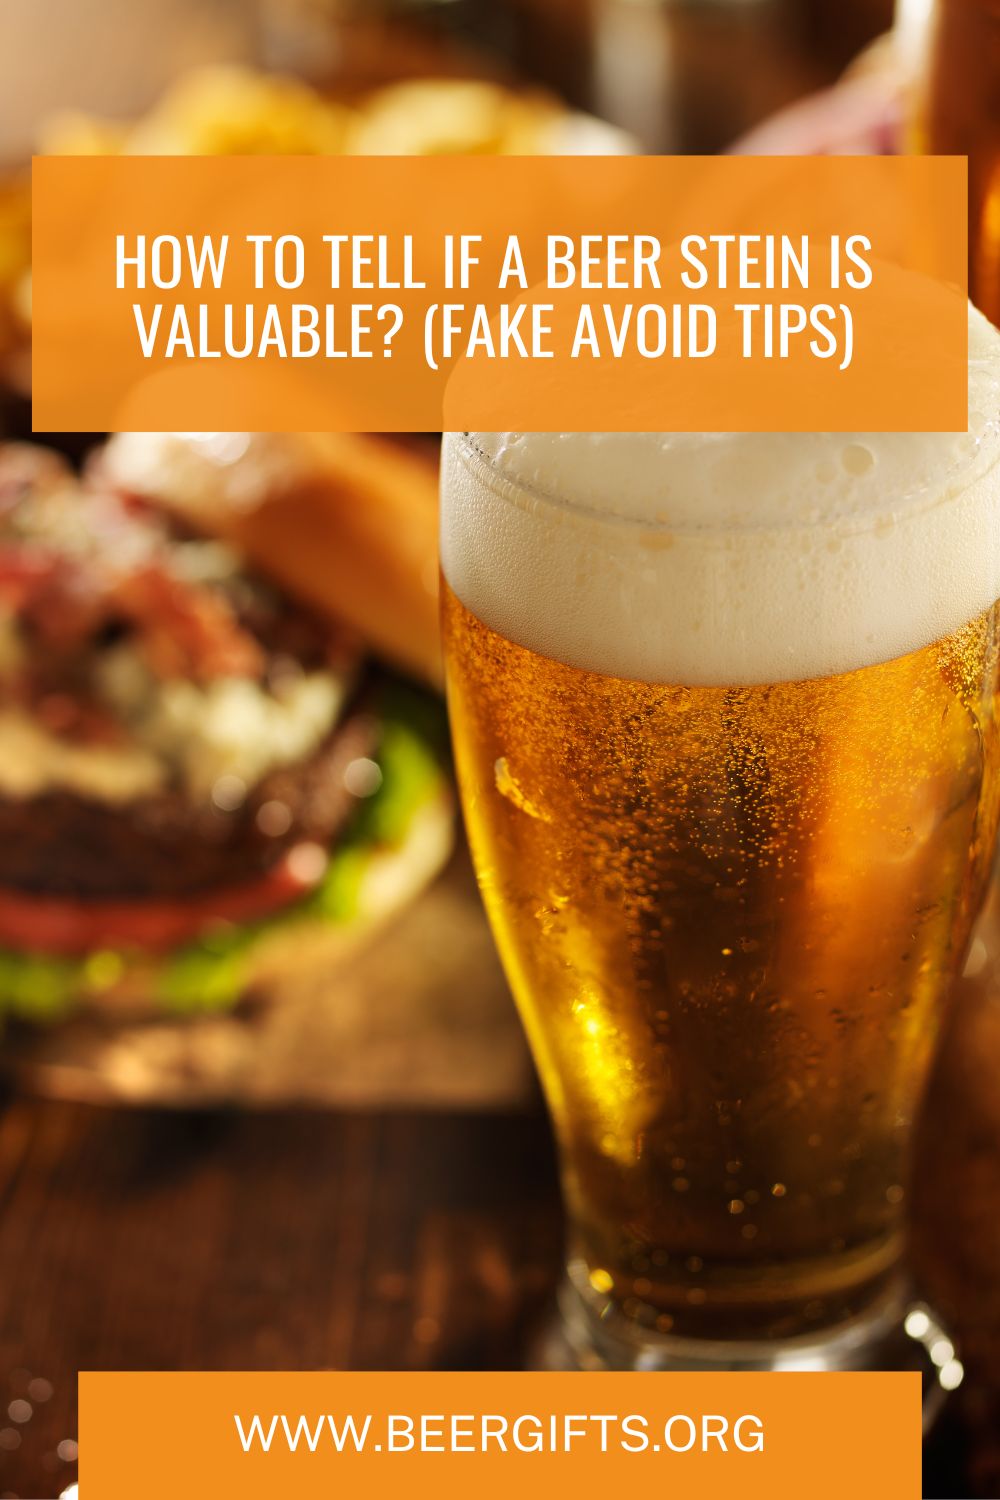 How to Tell If a Beer Stein Is Valuable (Fake Avoid Tips)